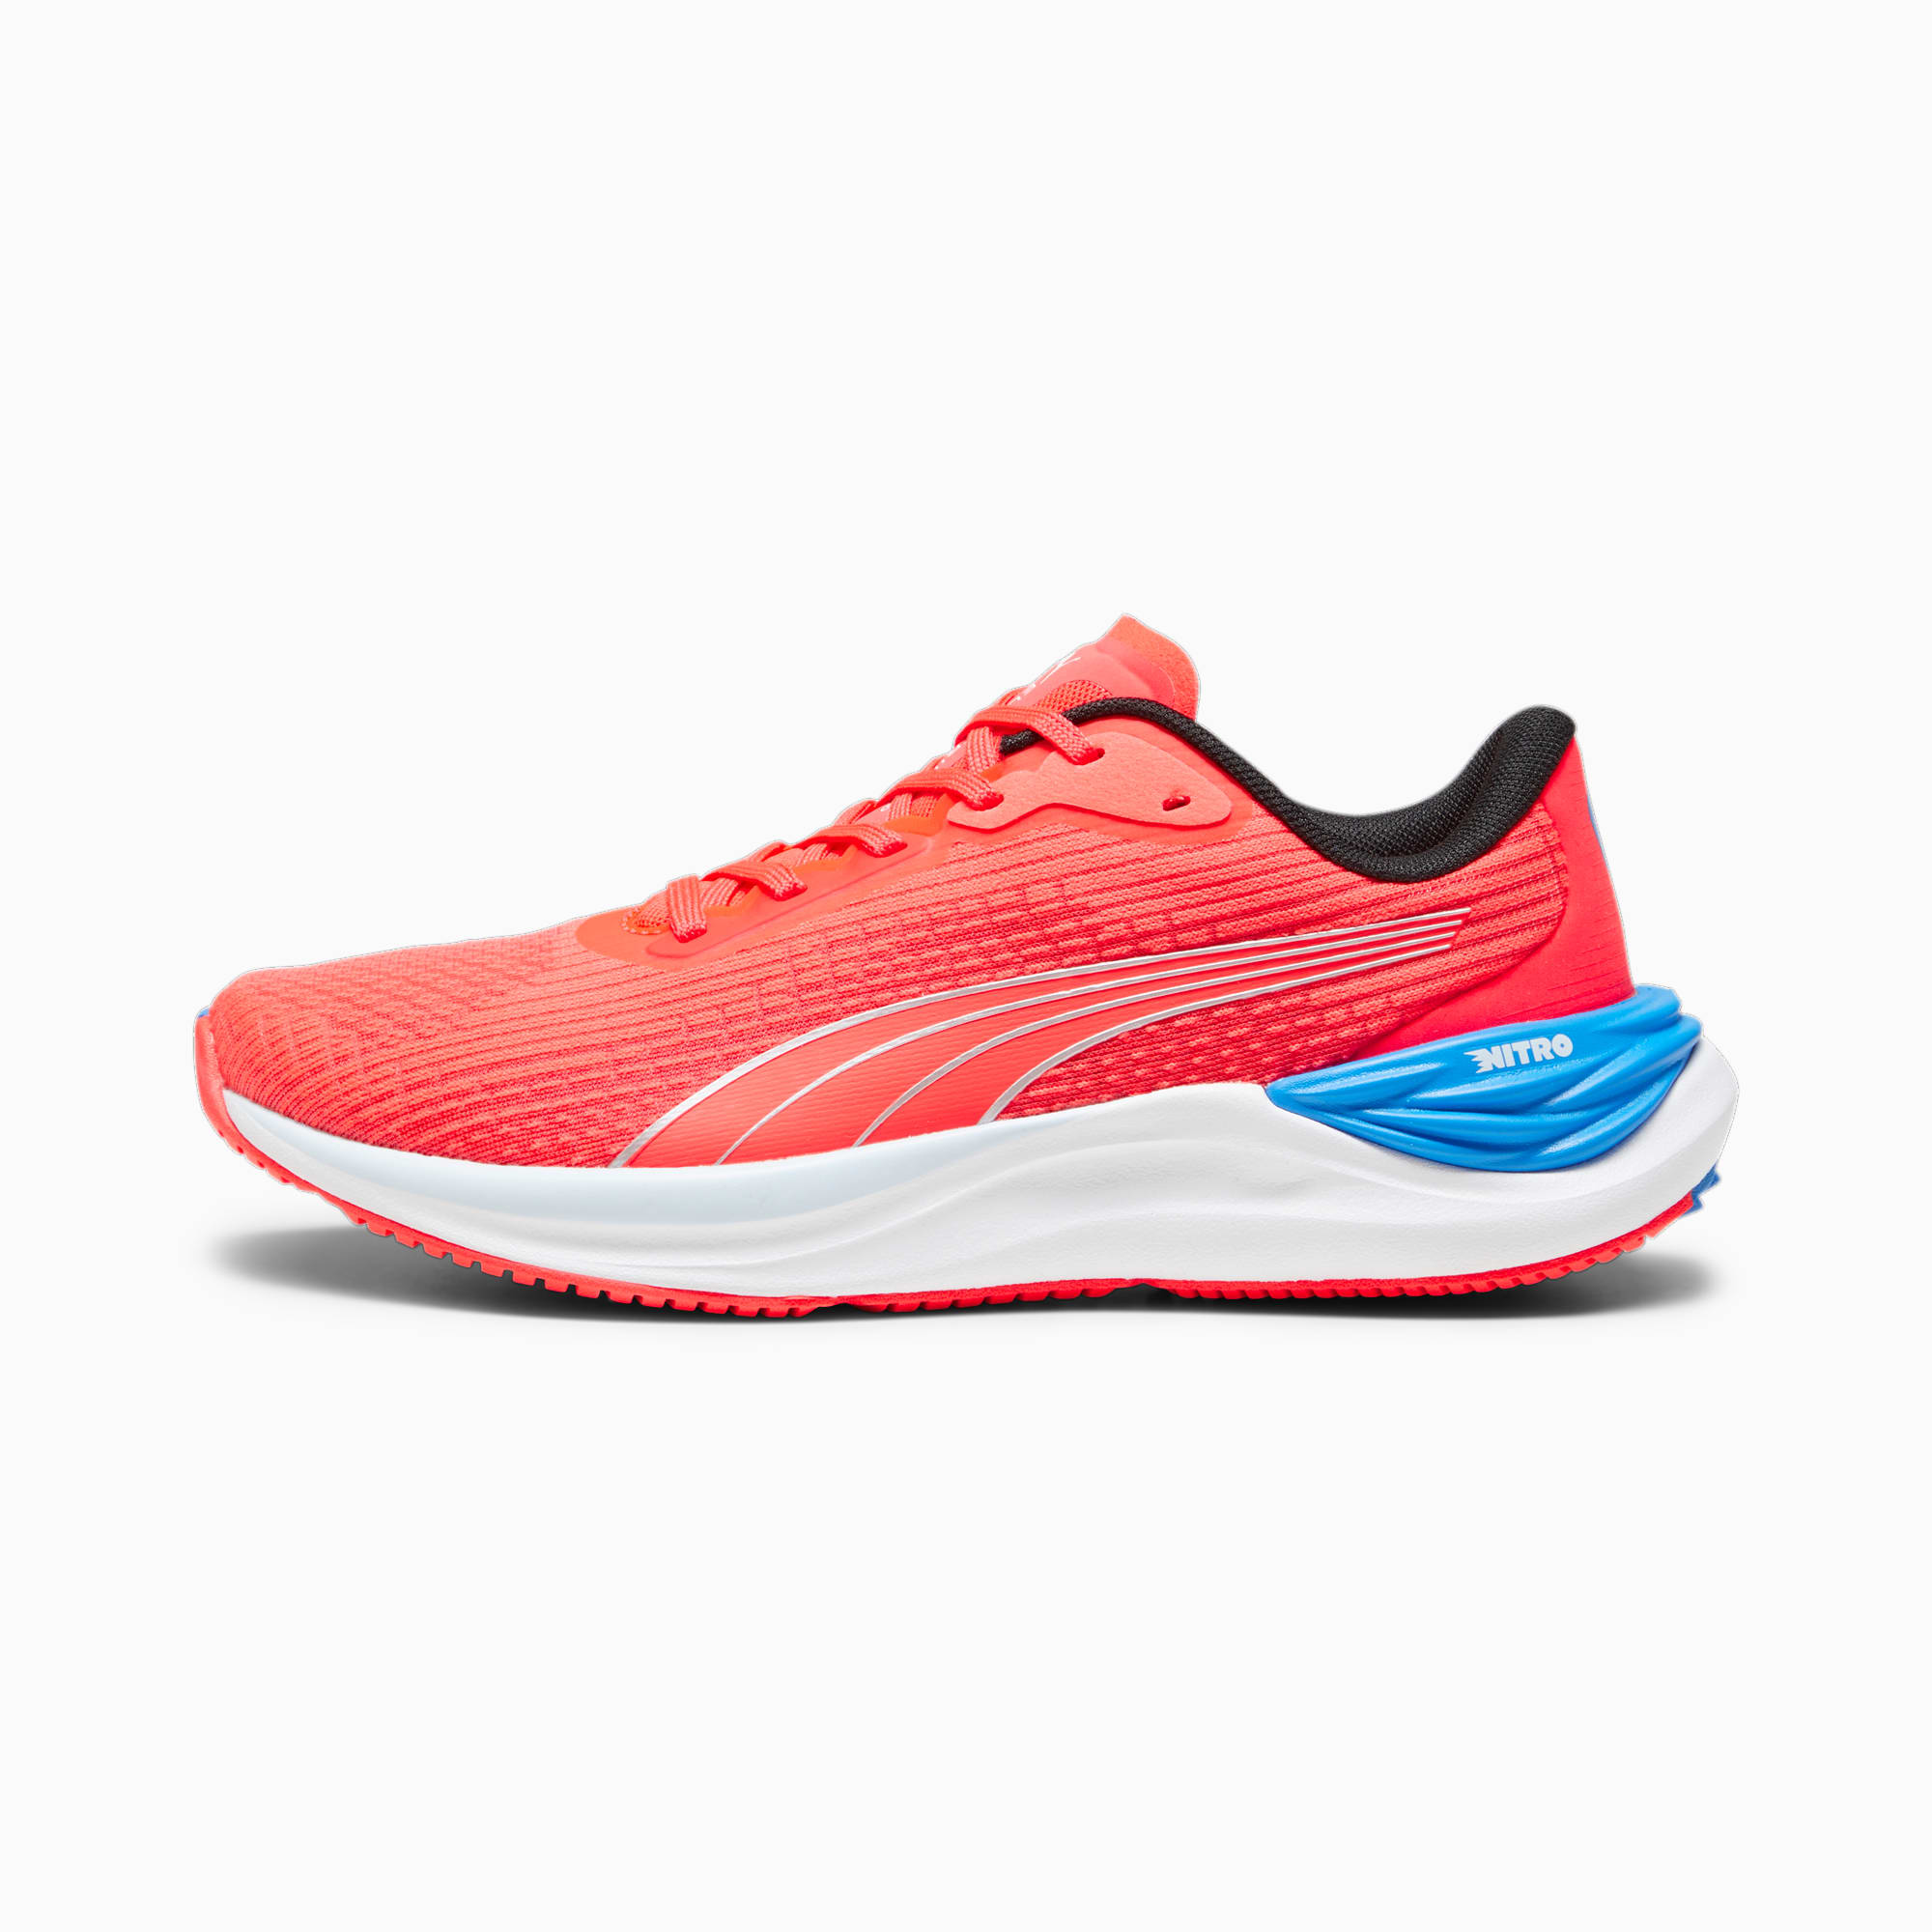 PUMA Electrify Nitro™ 3 Women's Running Shoes, Fire Orchid/Ultra Blue, Size 35,5, Shoes